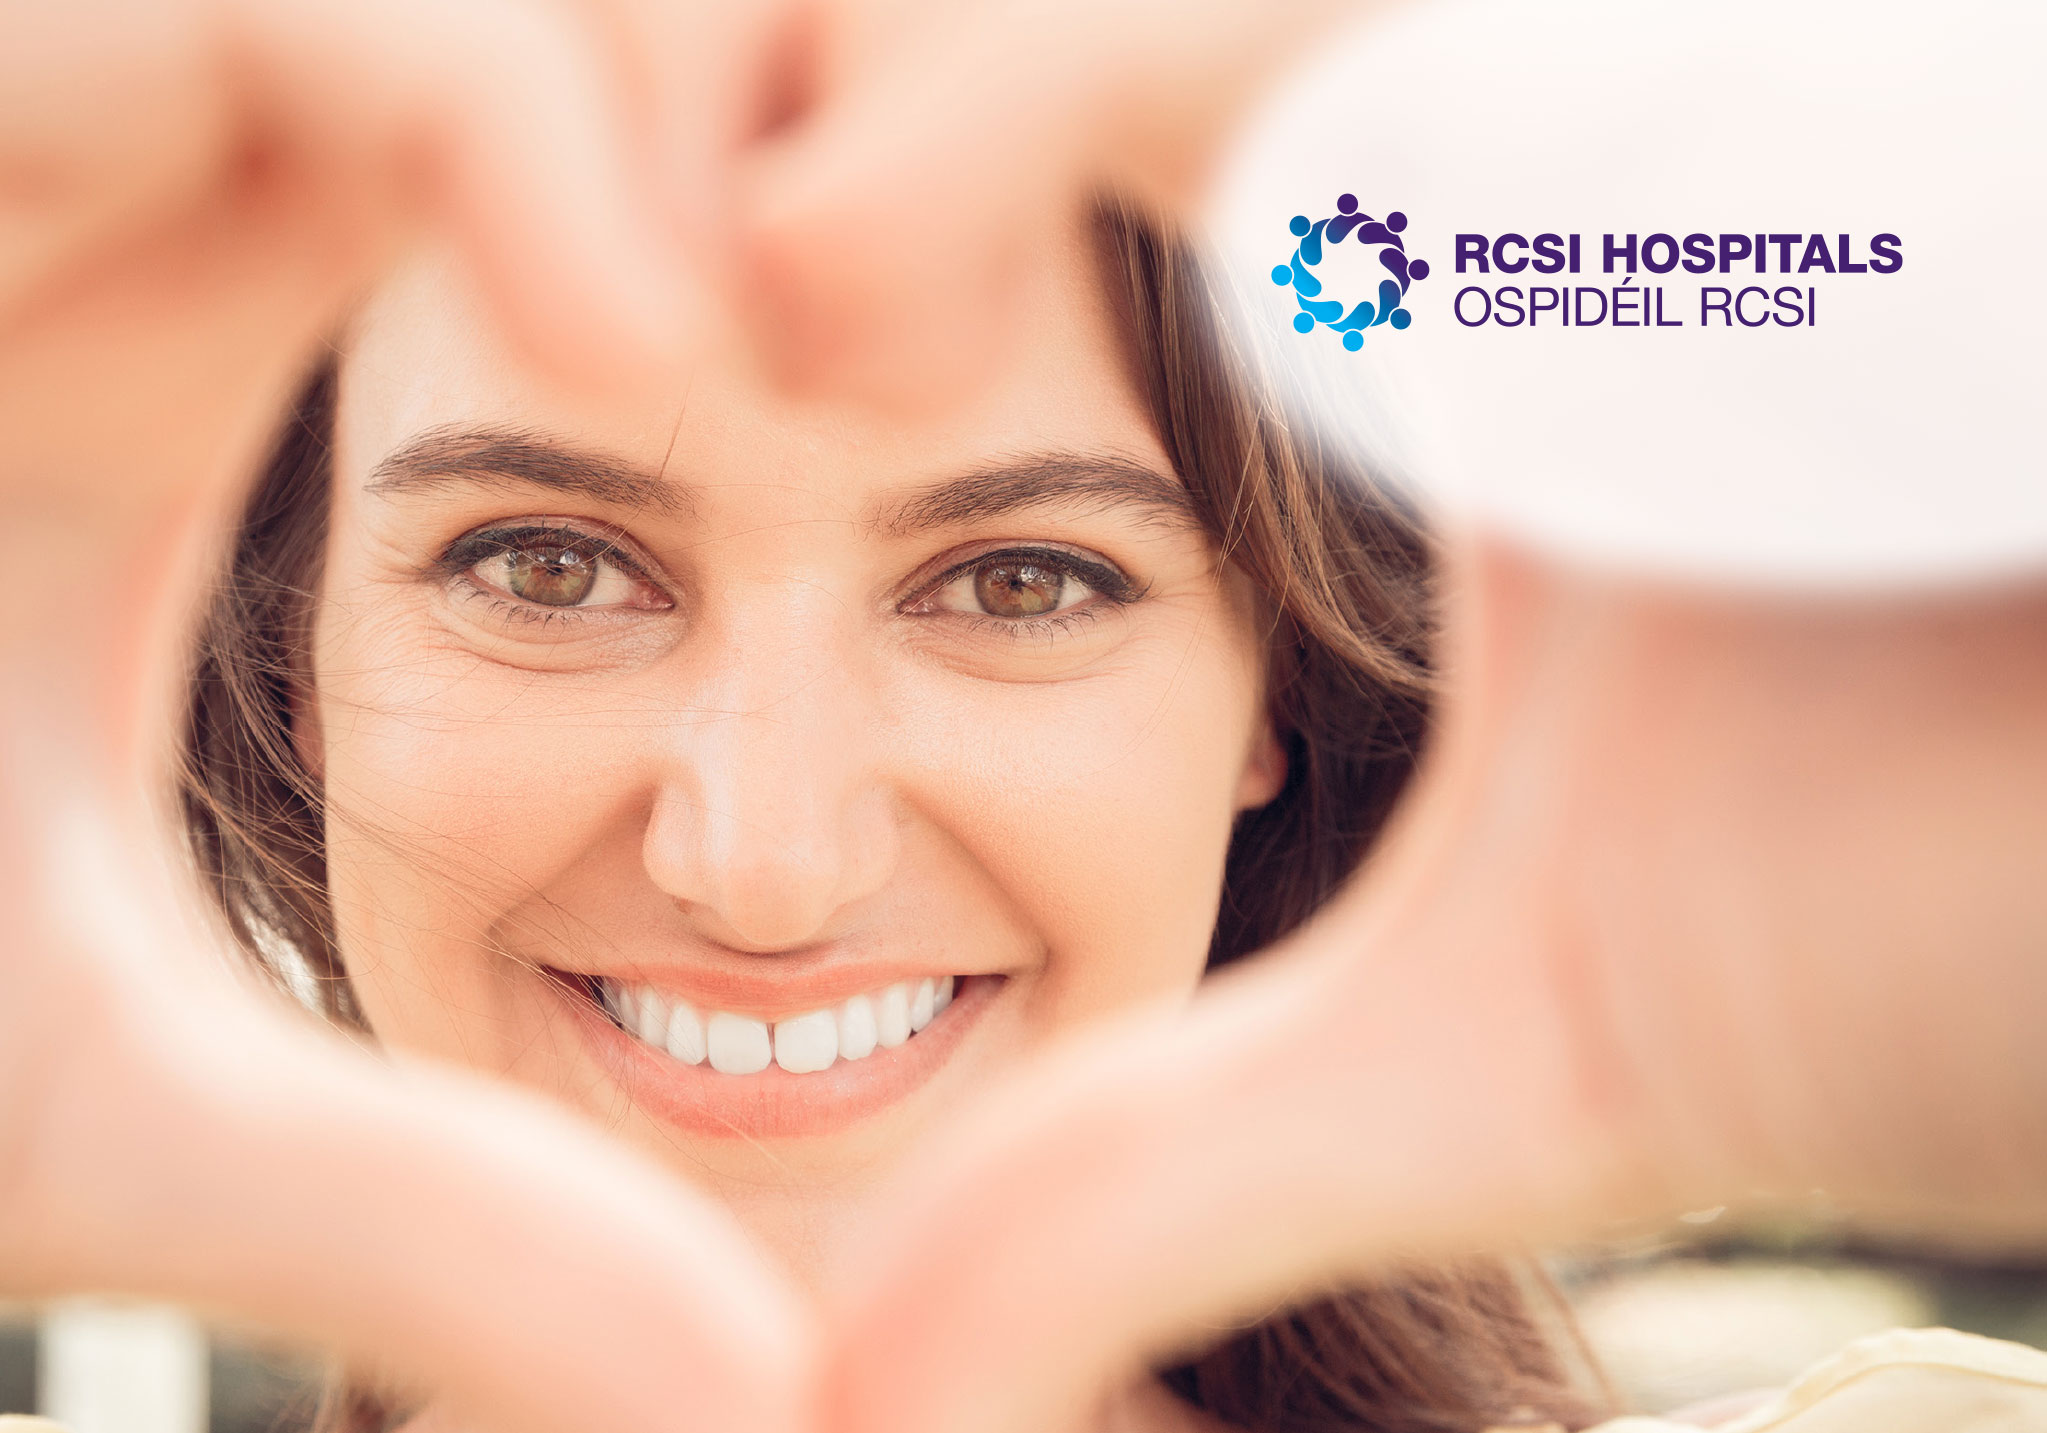 Cover slide with the RCSI Hospitals logo and a women smiling making a heart shape with her hands